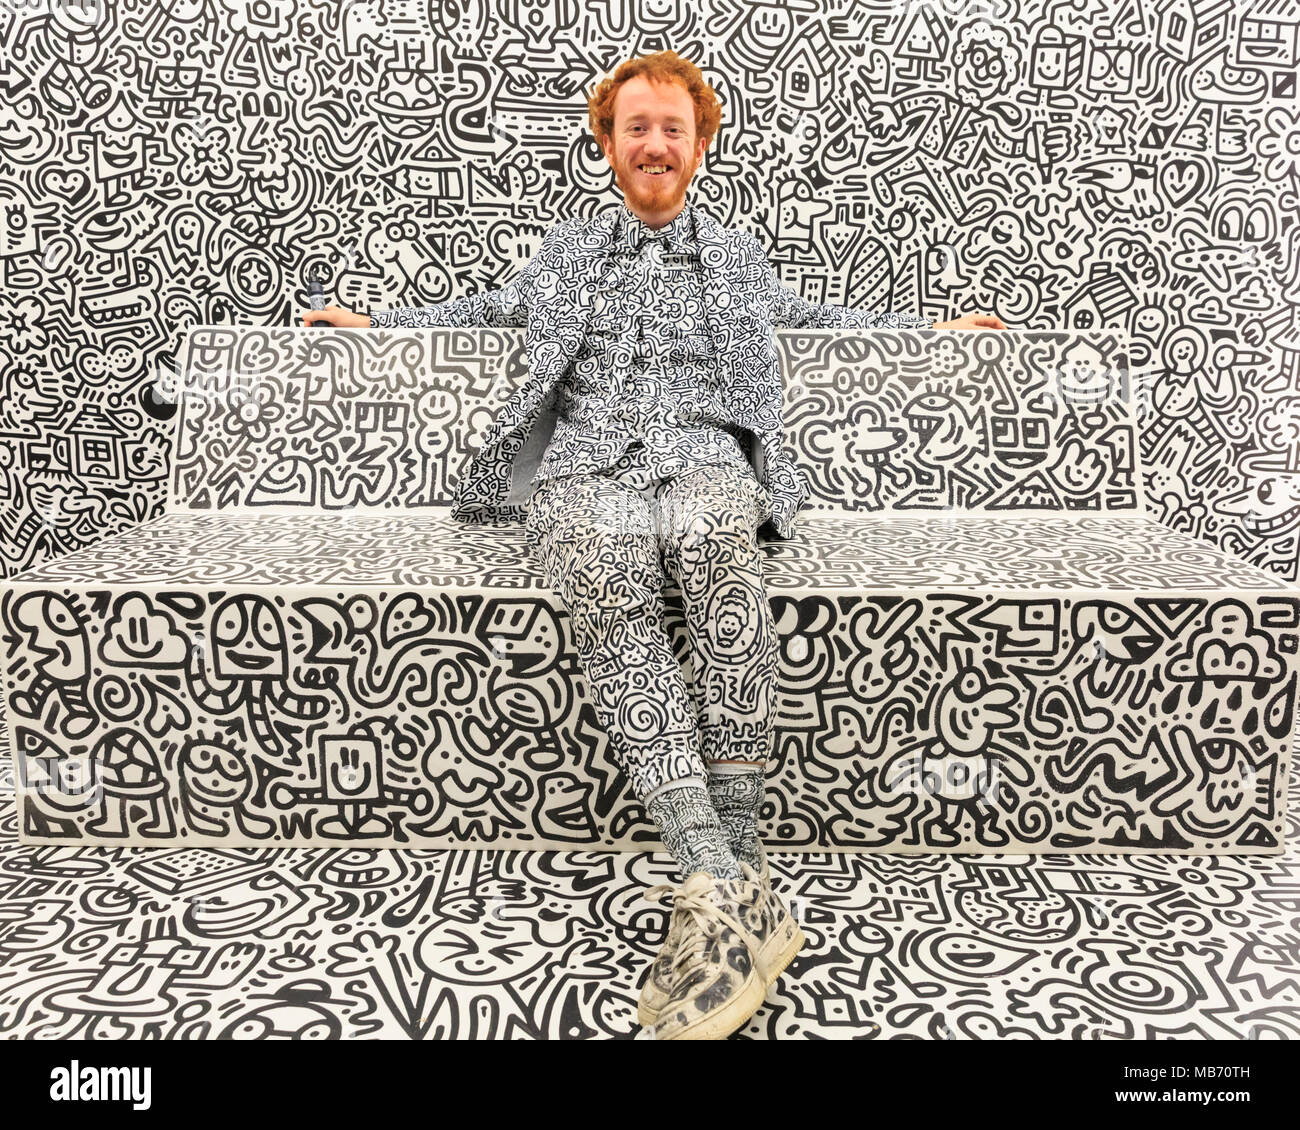 Exchange Square, London, 7th April 2018. Artist Sam Cox, portrait, known as 'Mr. Doodle', smiling. Mr Doodle, poses with his doodles artwork in 'The Doodle Room'. Visitors and art lovers have fun exploring the 'Sense Of Space' art exhibition and installations in Exchange Square, Broadgate, London, England, running until 18th May. Sense Of Space has four rooms overall, designed to activate the different senses. Credit: Imageplotter Stock Photo